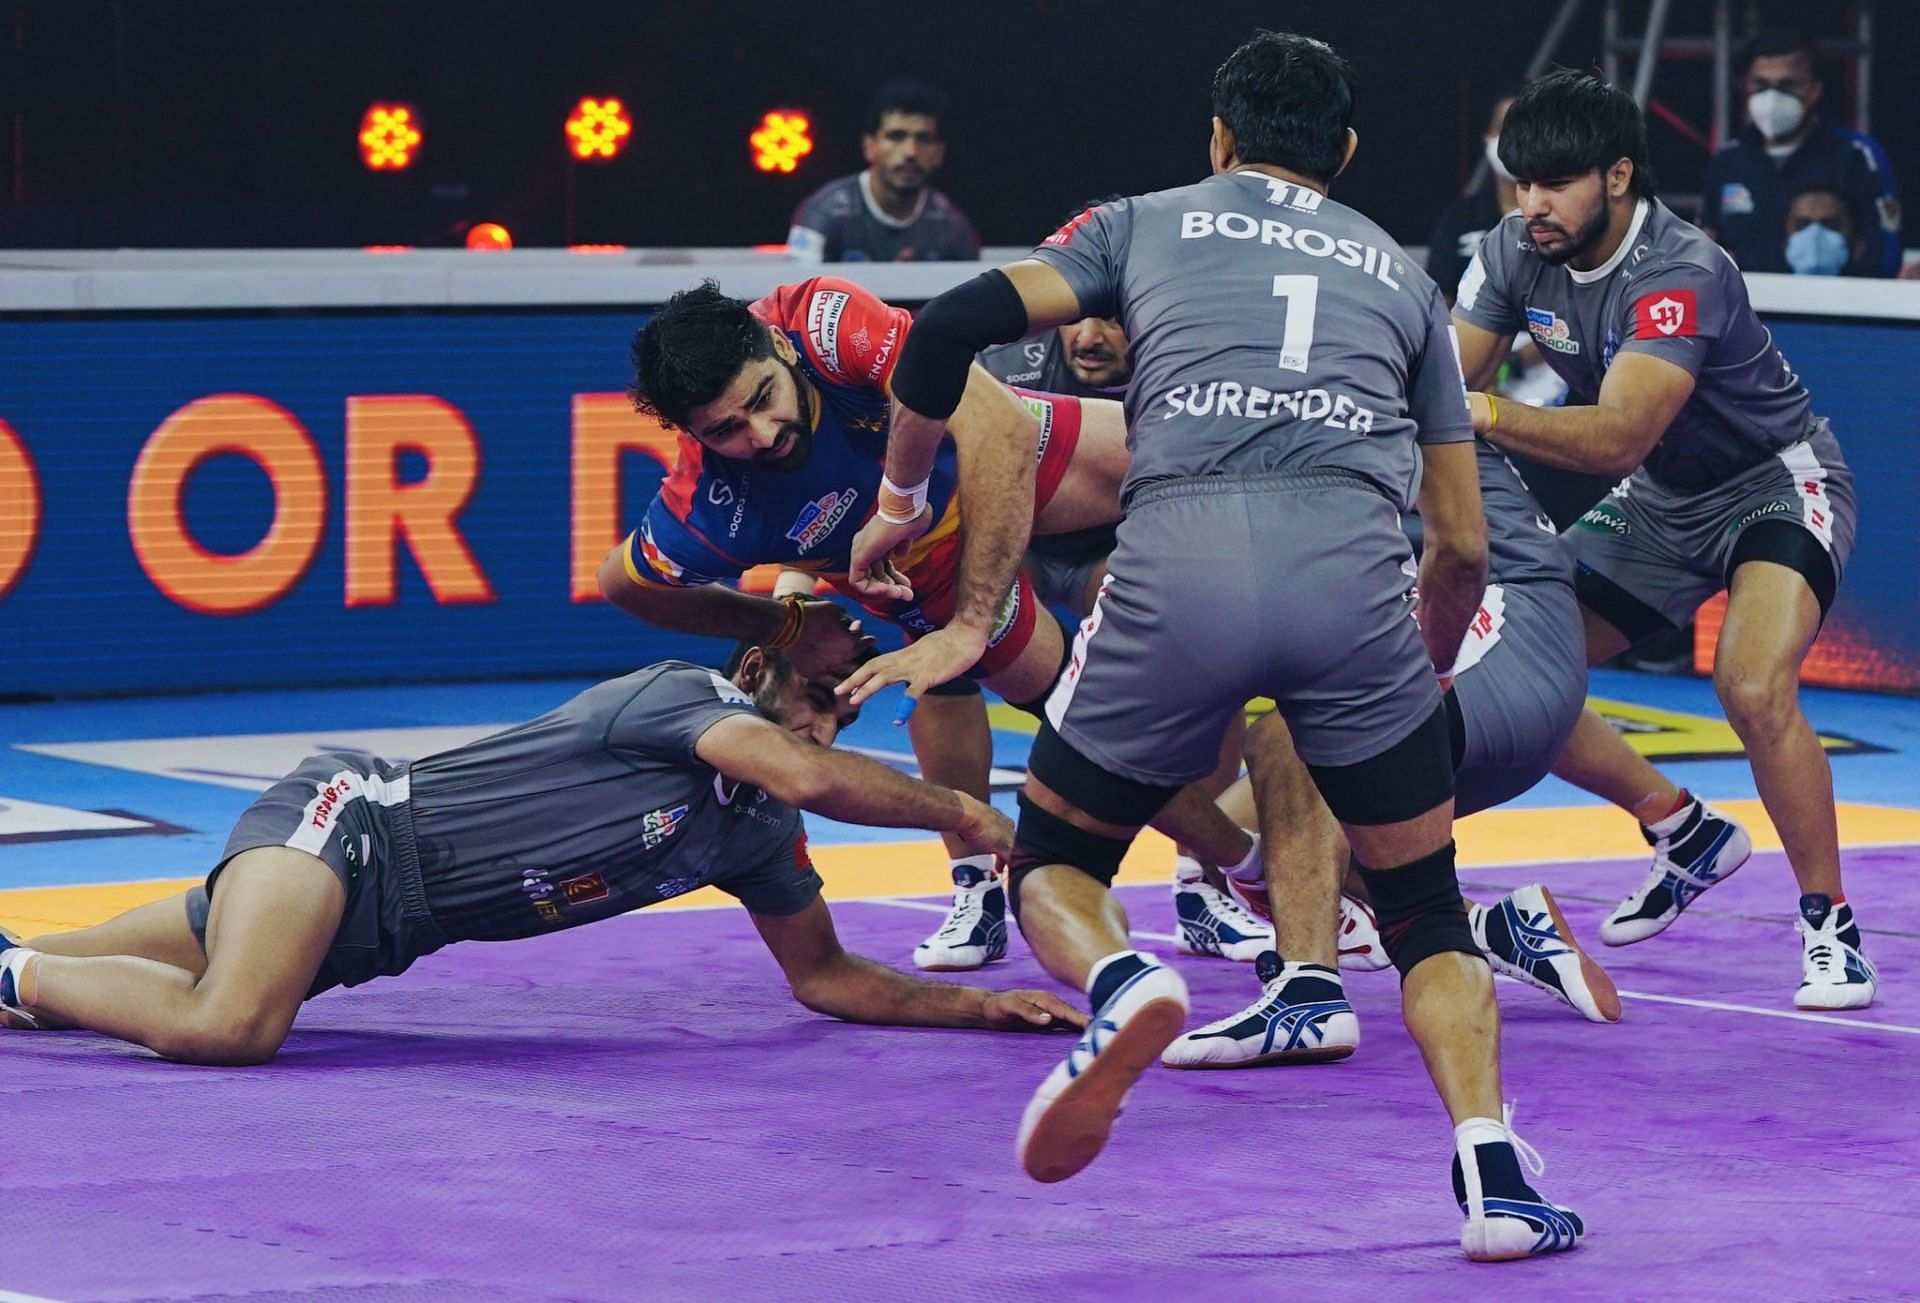 Steelers&#039; players tackle UP Yoddha raider Pardeep Narwal - Image Courtesy: Steelers Twitter